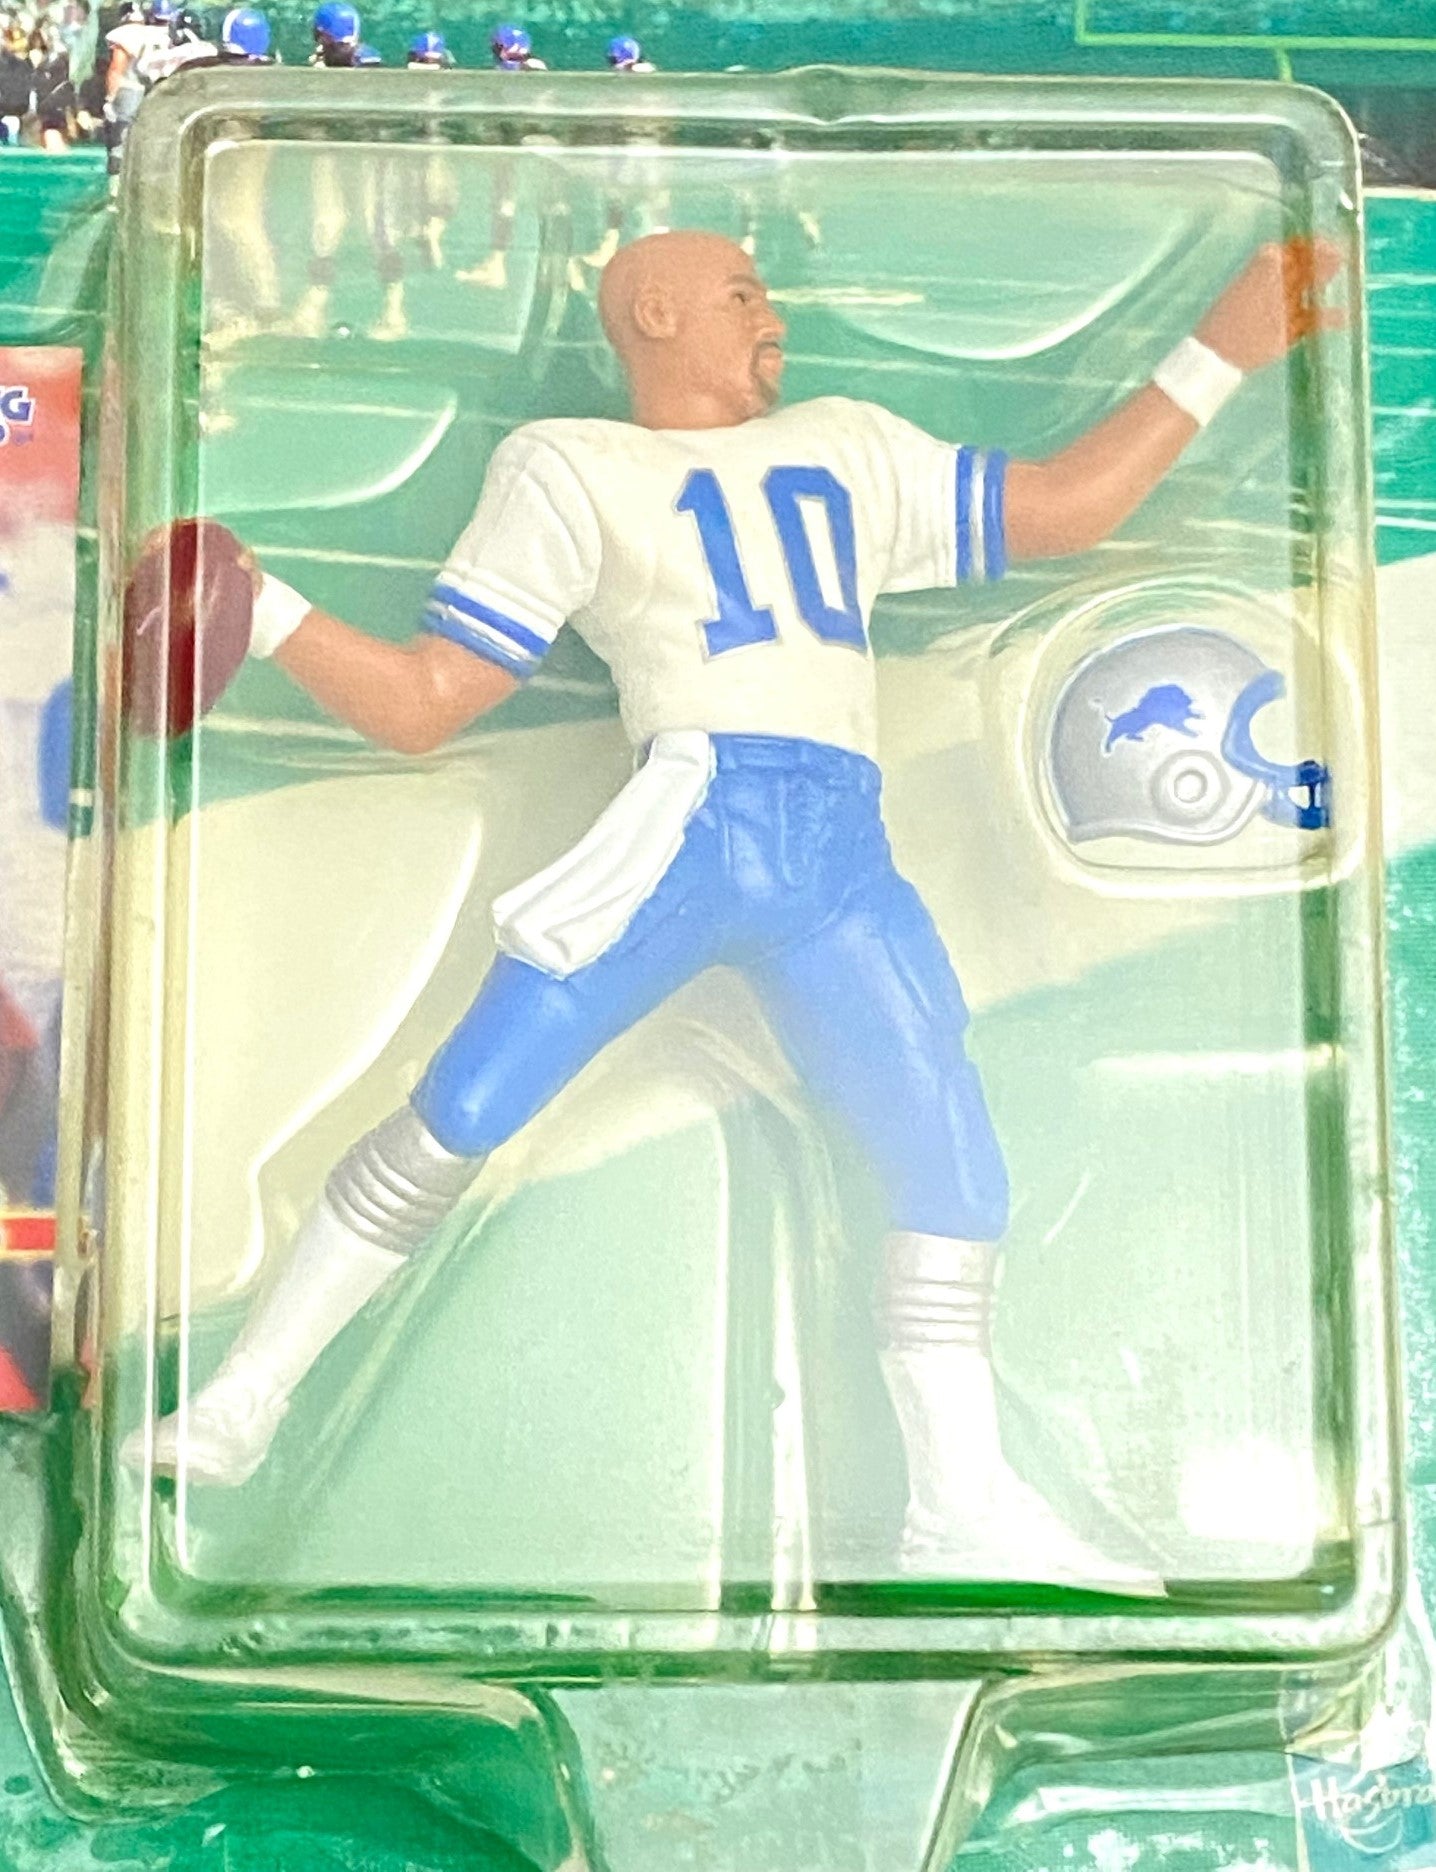 Charlie Batch 1999-2000 NFL Detroit Lions Starting Lineup Figurine by Hasbro